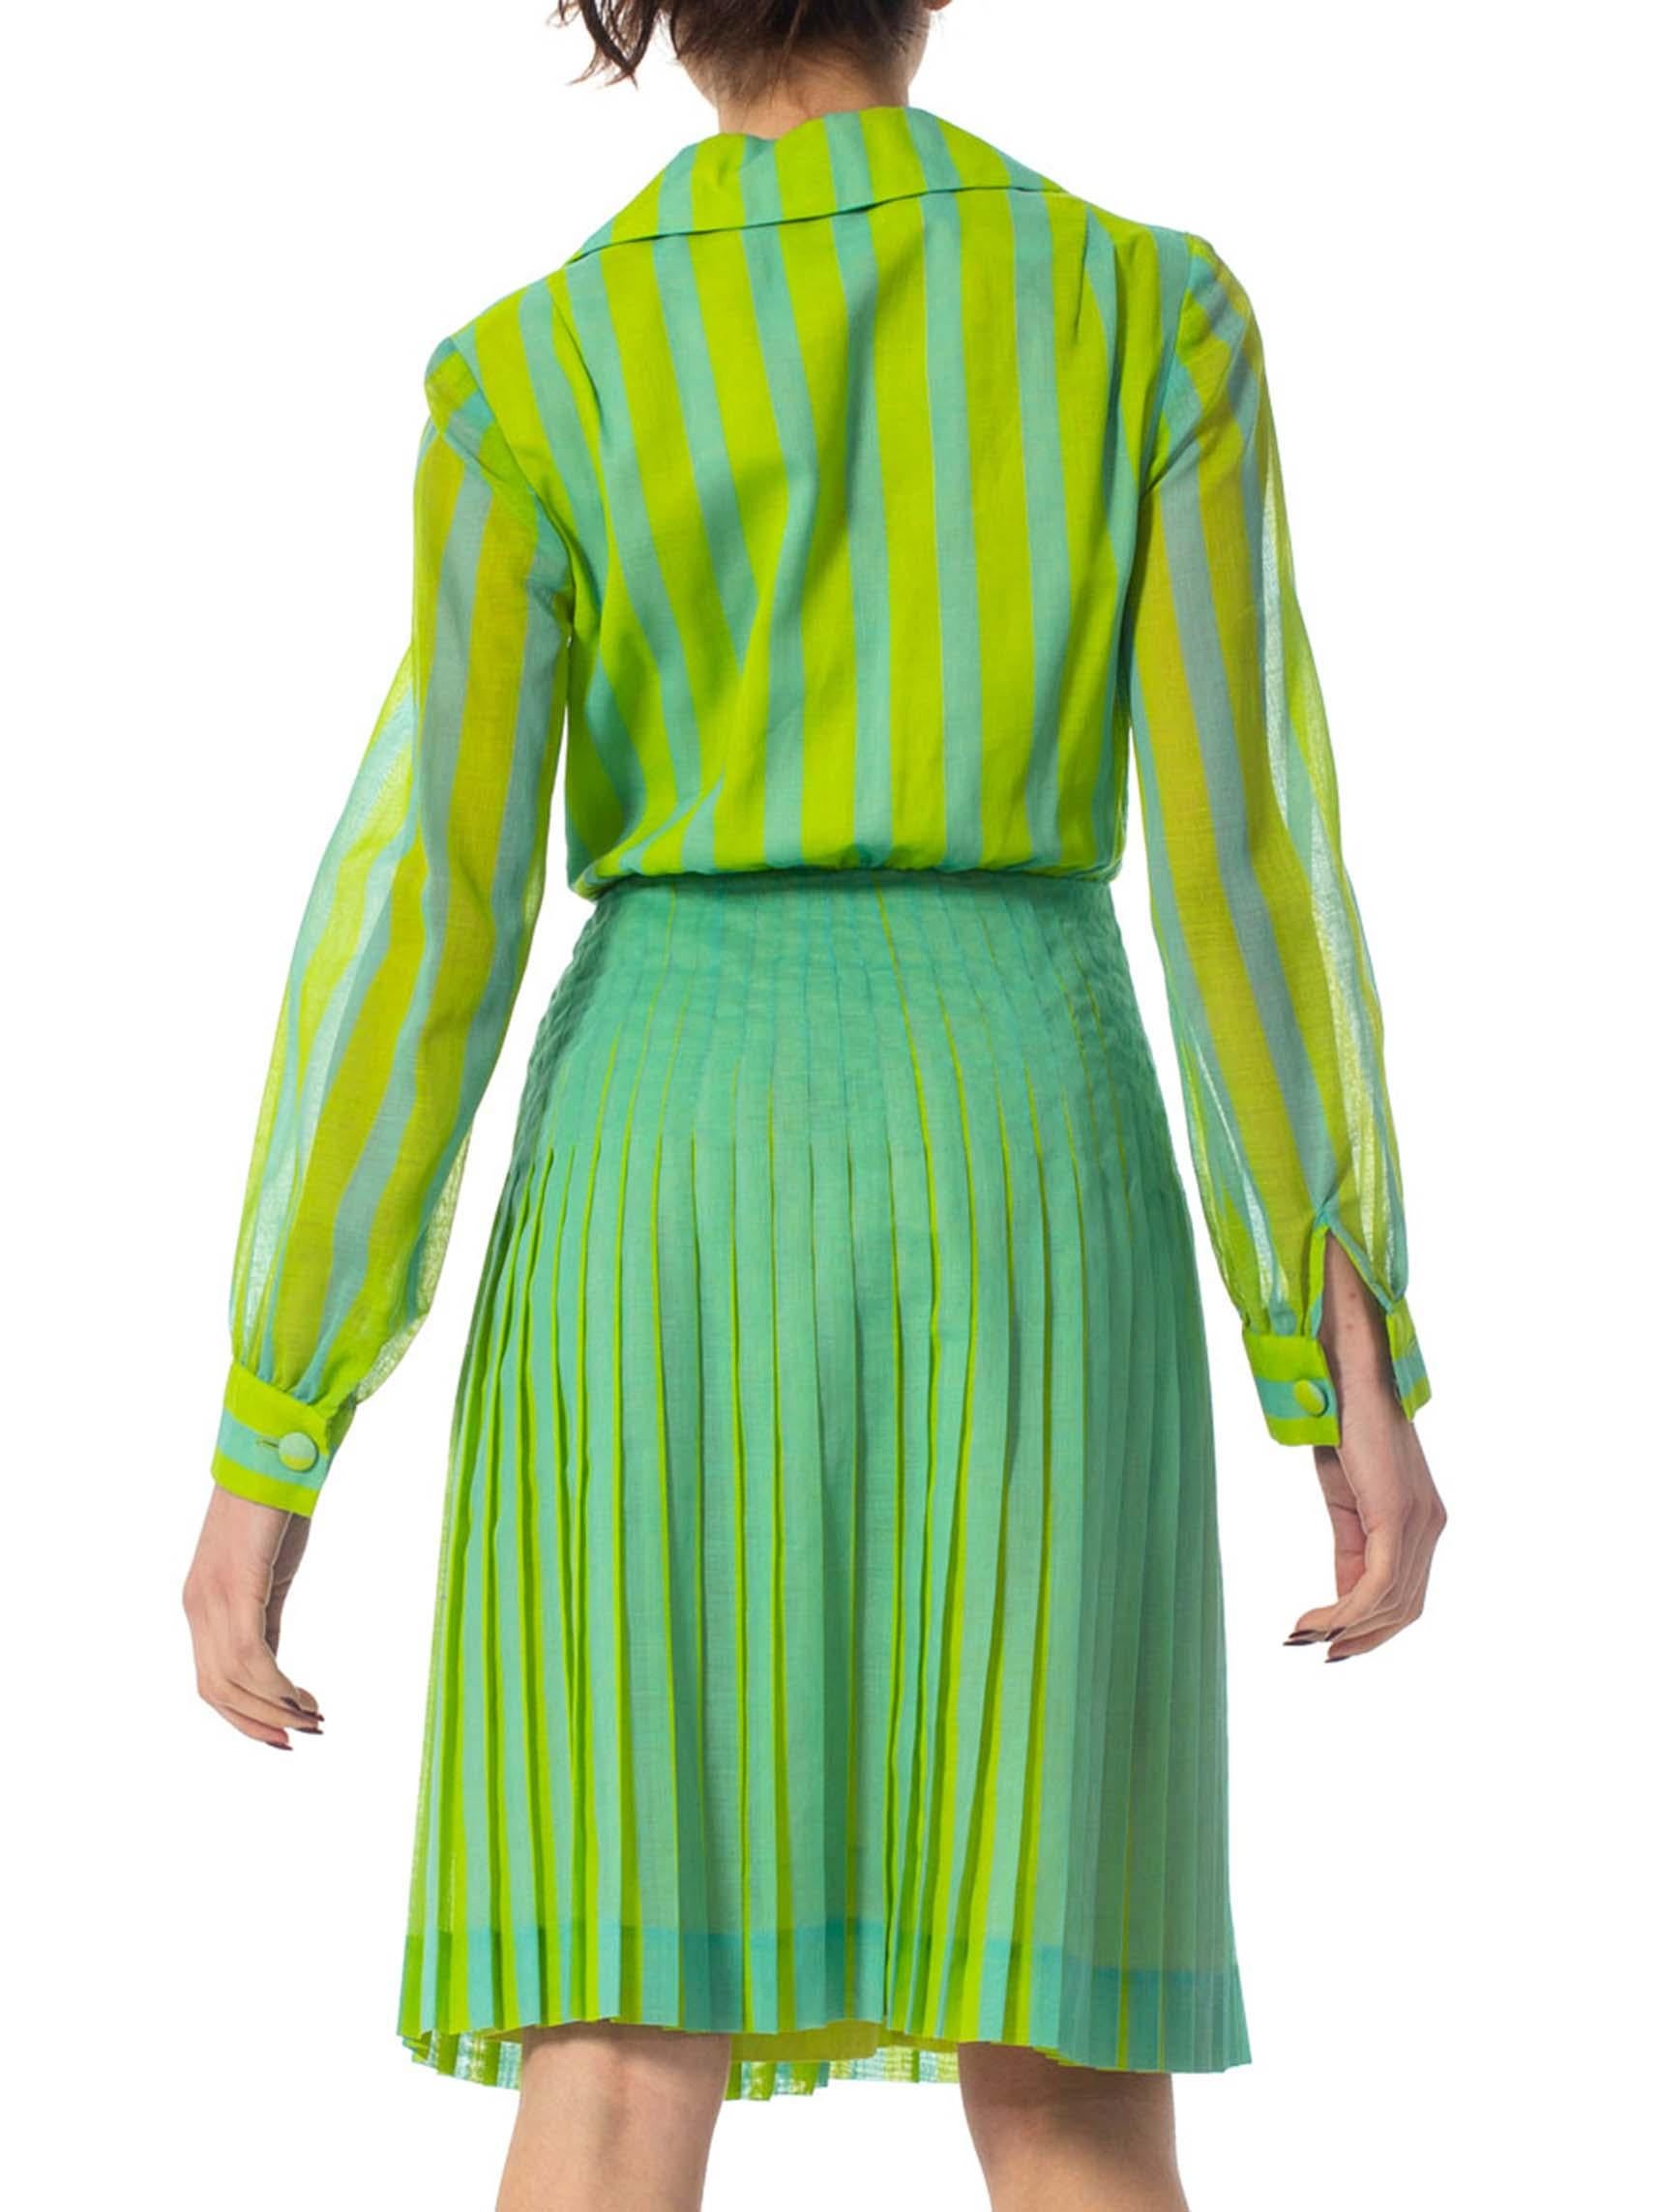 1970S DADDY DRADDY's Lime Green & Blue Cotton Striped Pleated Mod Dress For Sale 4